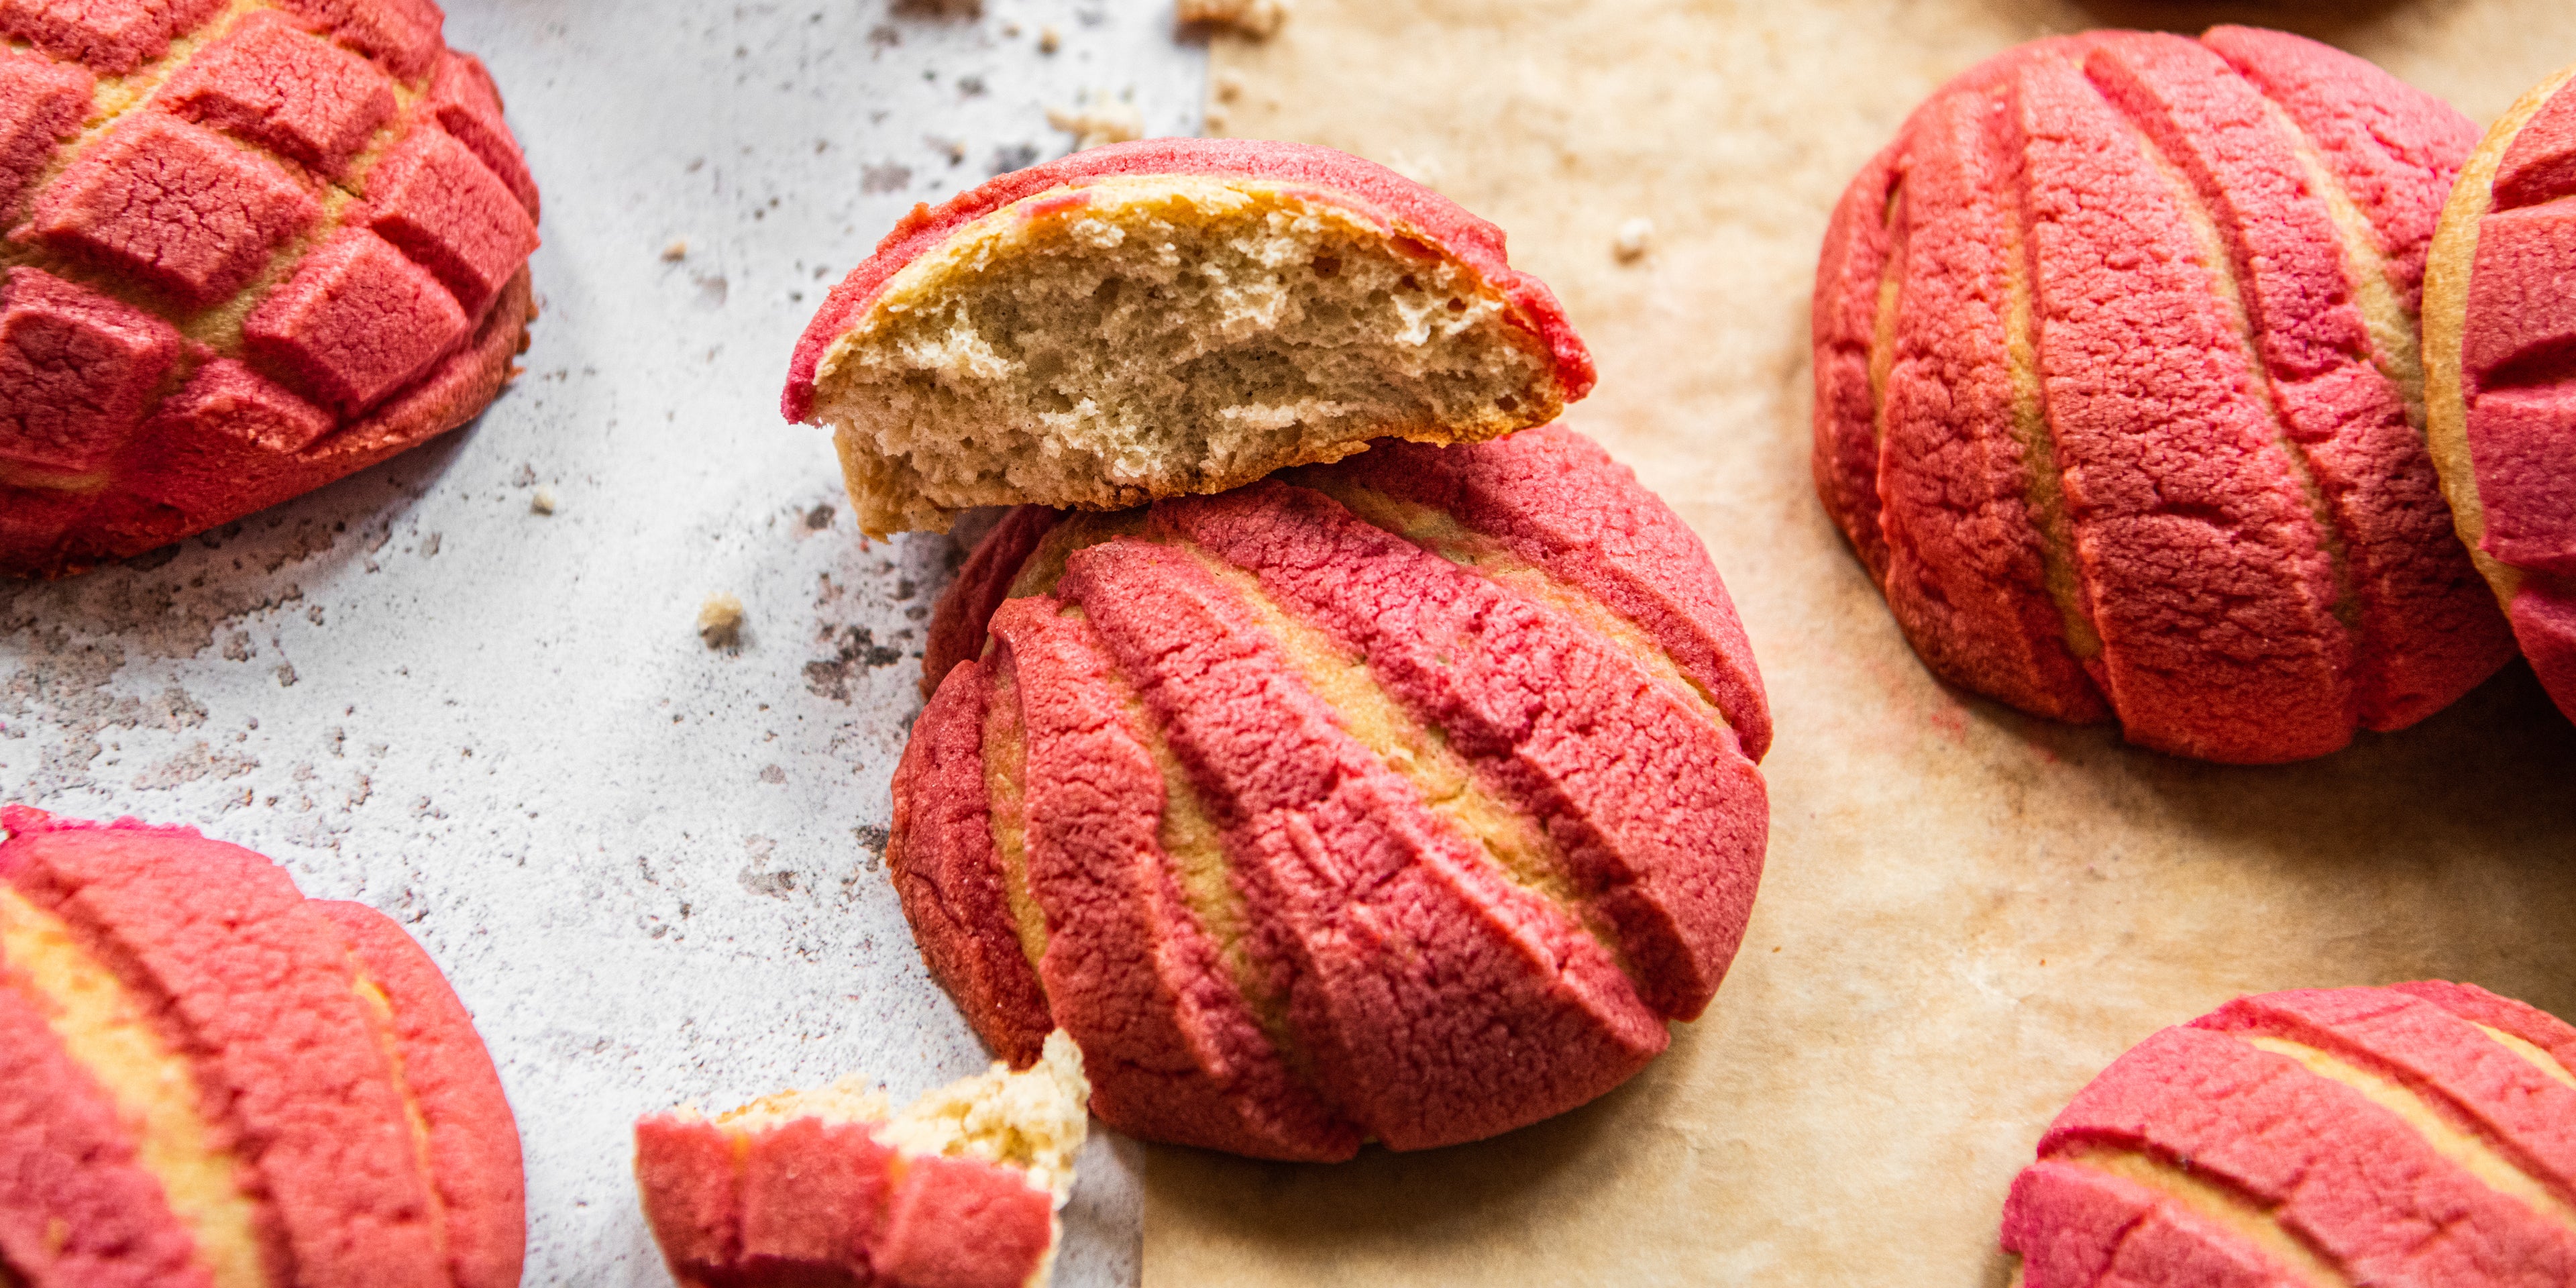 Close up of Conchas, with patterned pink tops broken open to show the golden insides and crumbly texture.